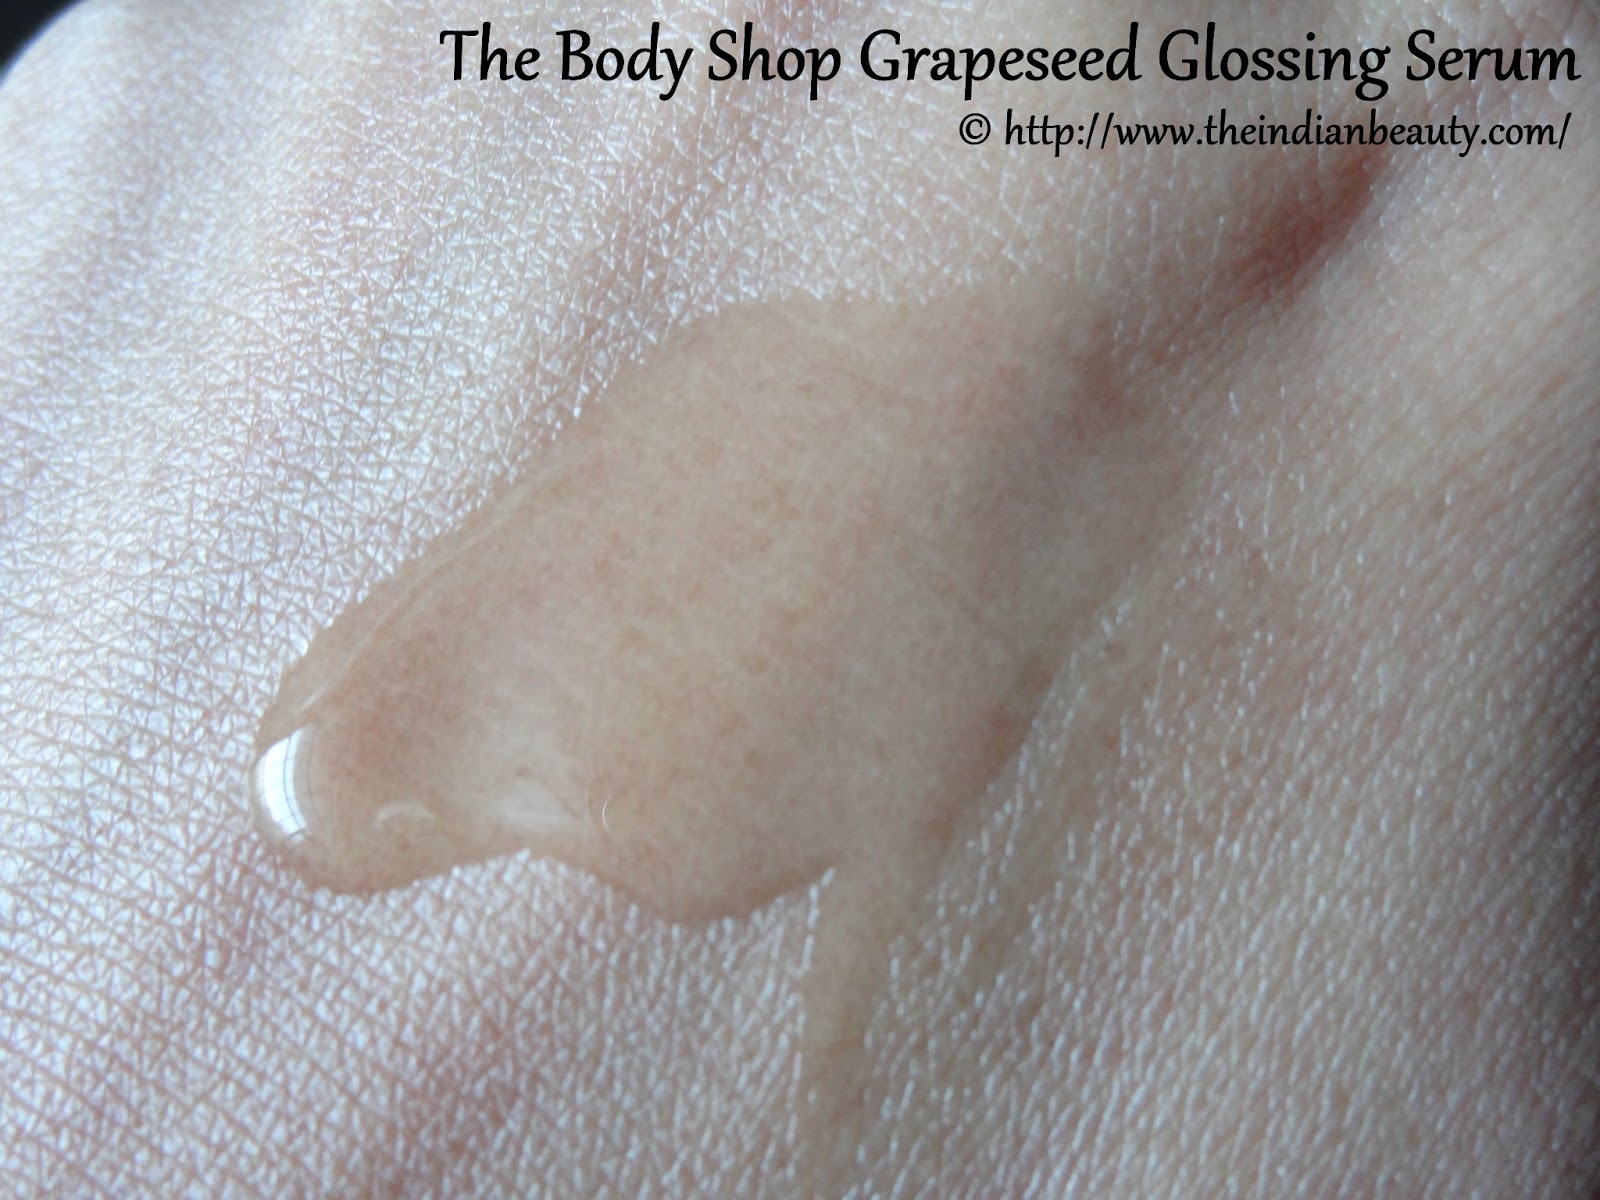 The Body Shop Grapeseed Glossing Serum: Review, swatch - The Indian Beauty  Blog